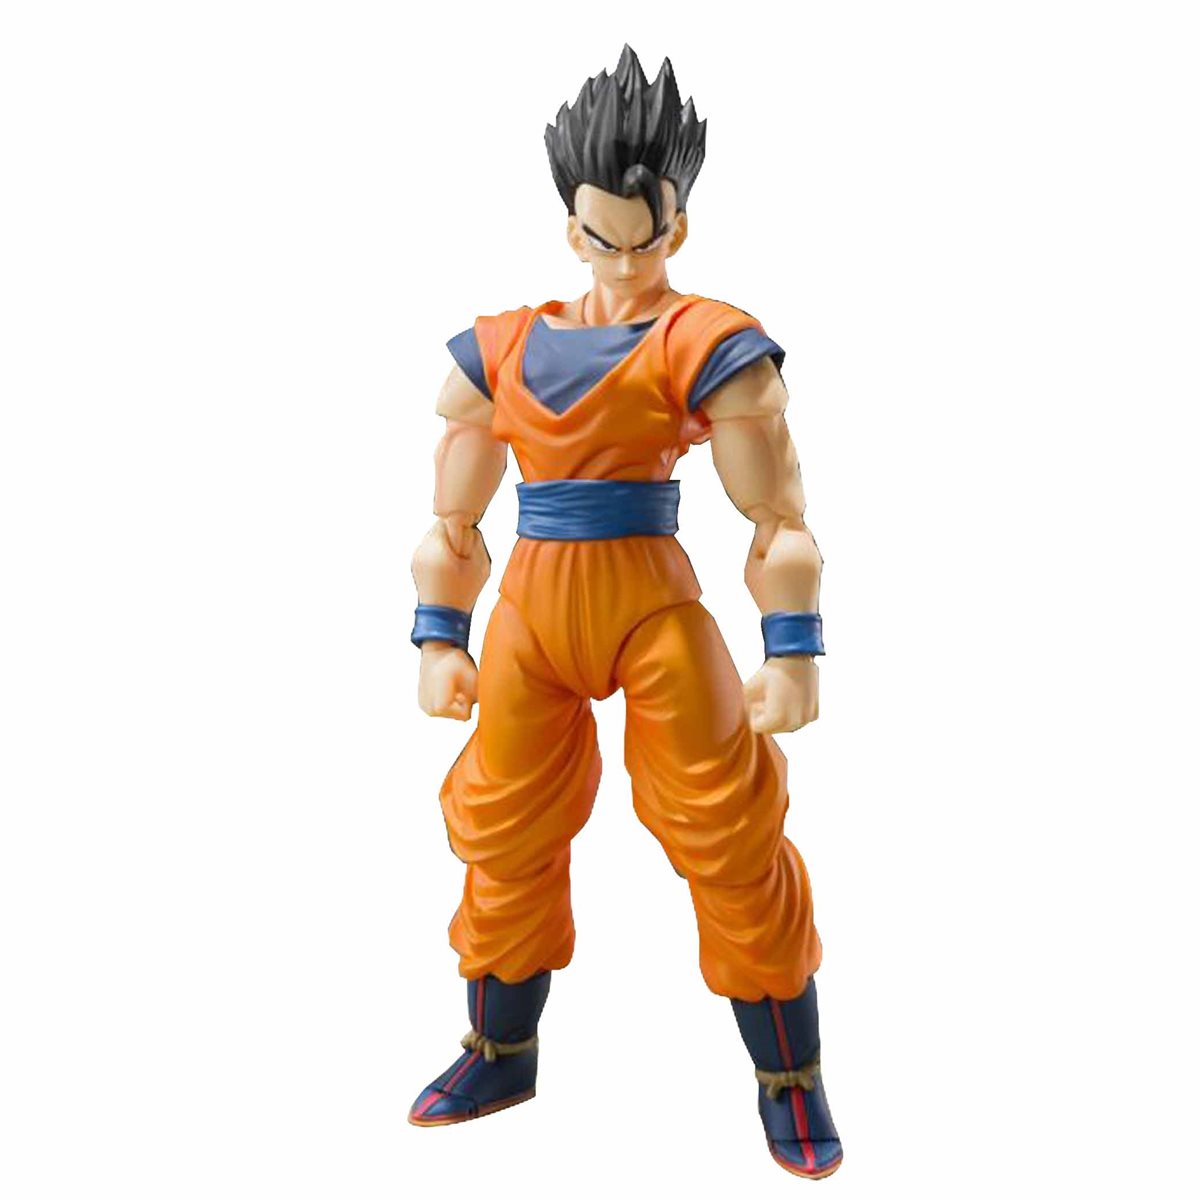 SDCC 2019 Exclusive Tamashii Nations SH Figuarts DBZ Ultimate Gohan In hand